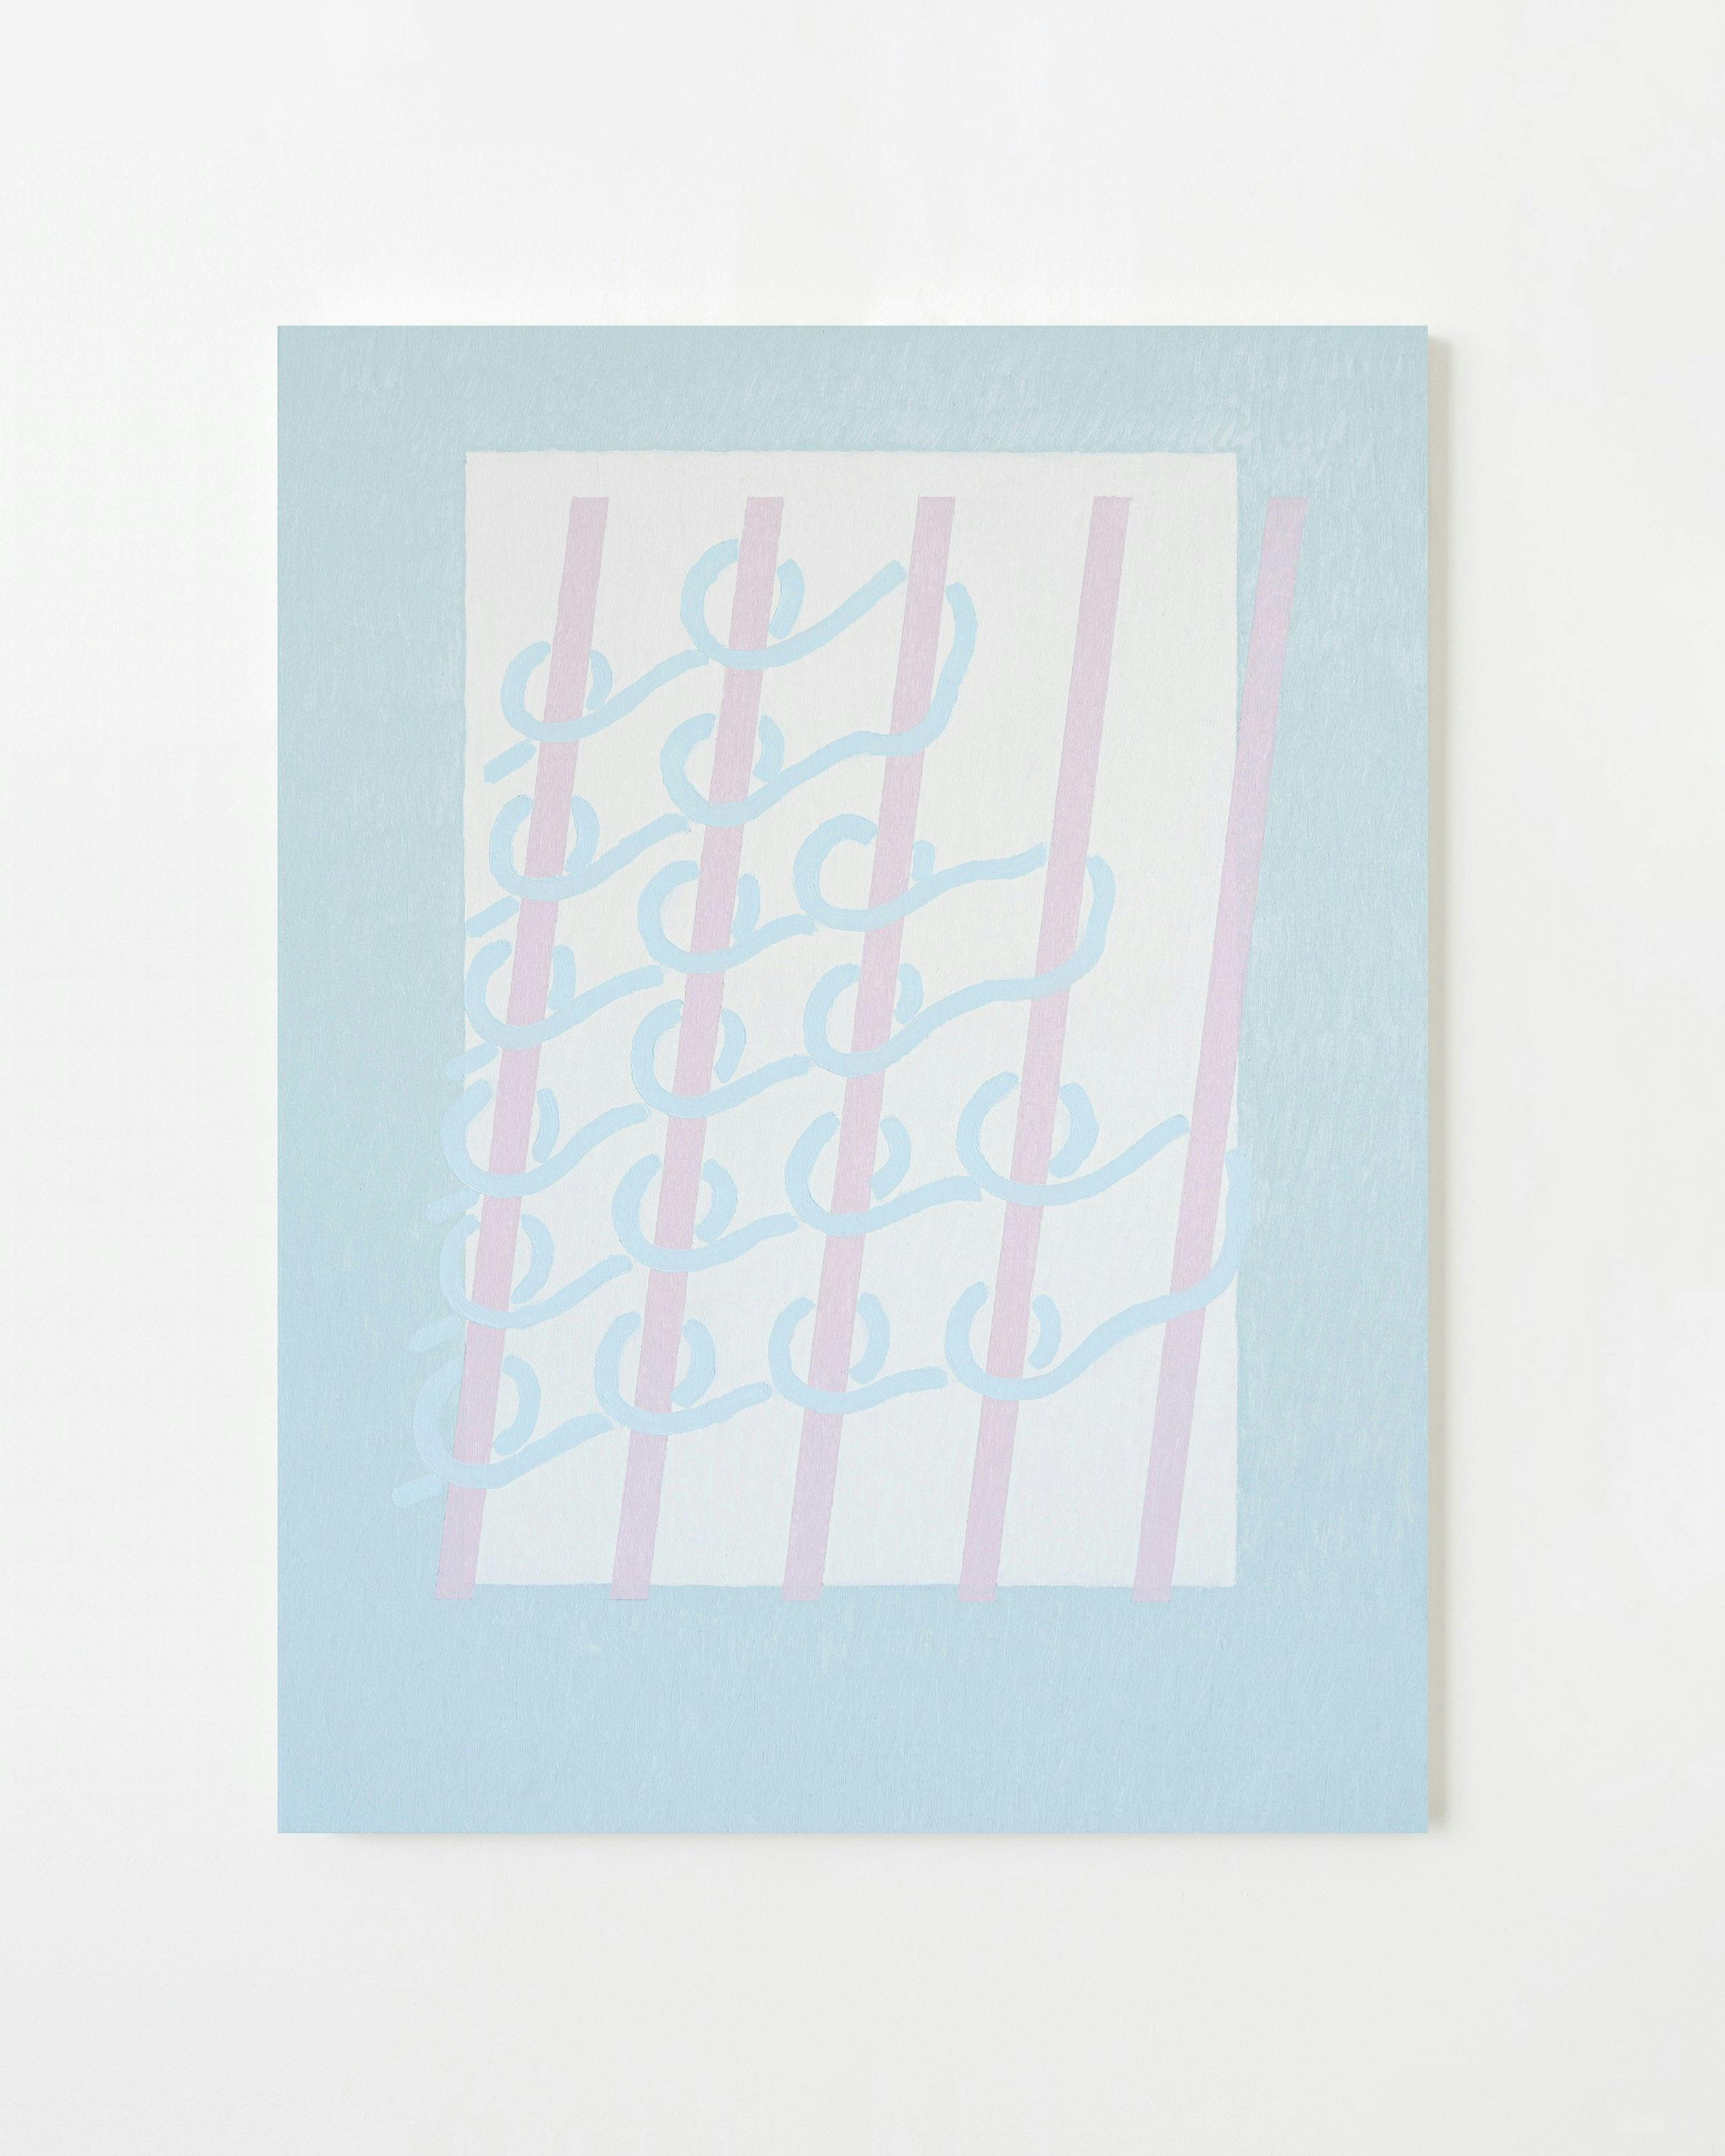 Painting by Aschely Vaughan Cone titled "Plain Weave I, Pink and Blue".